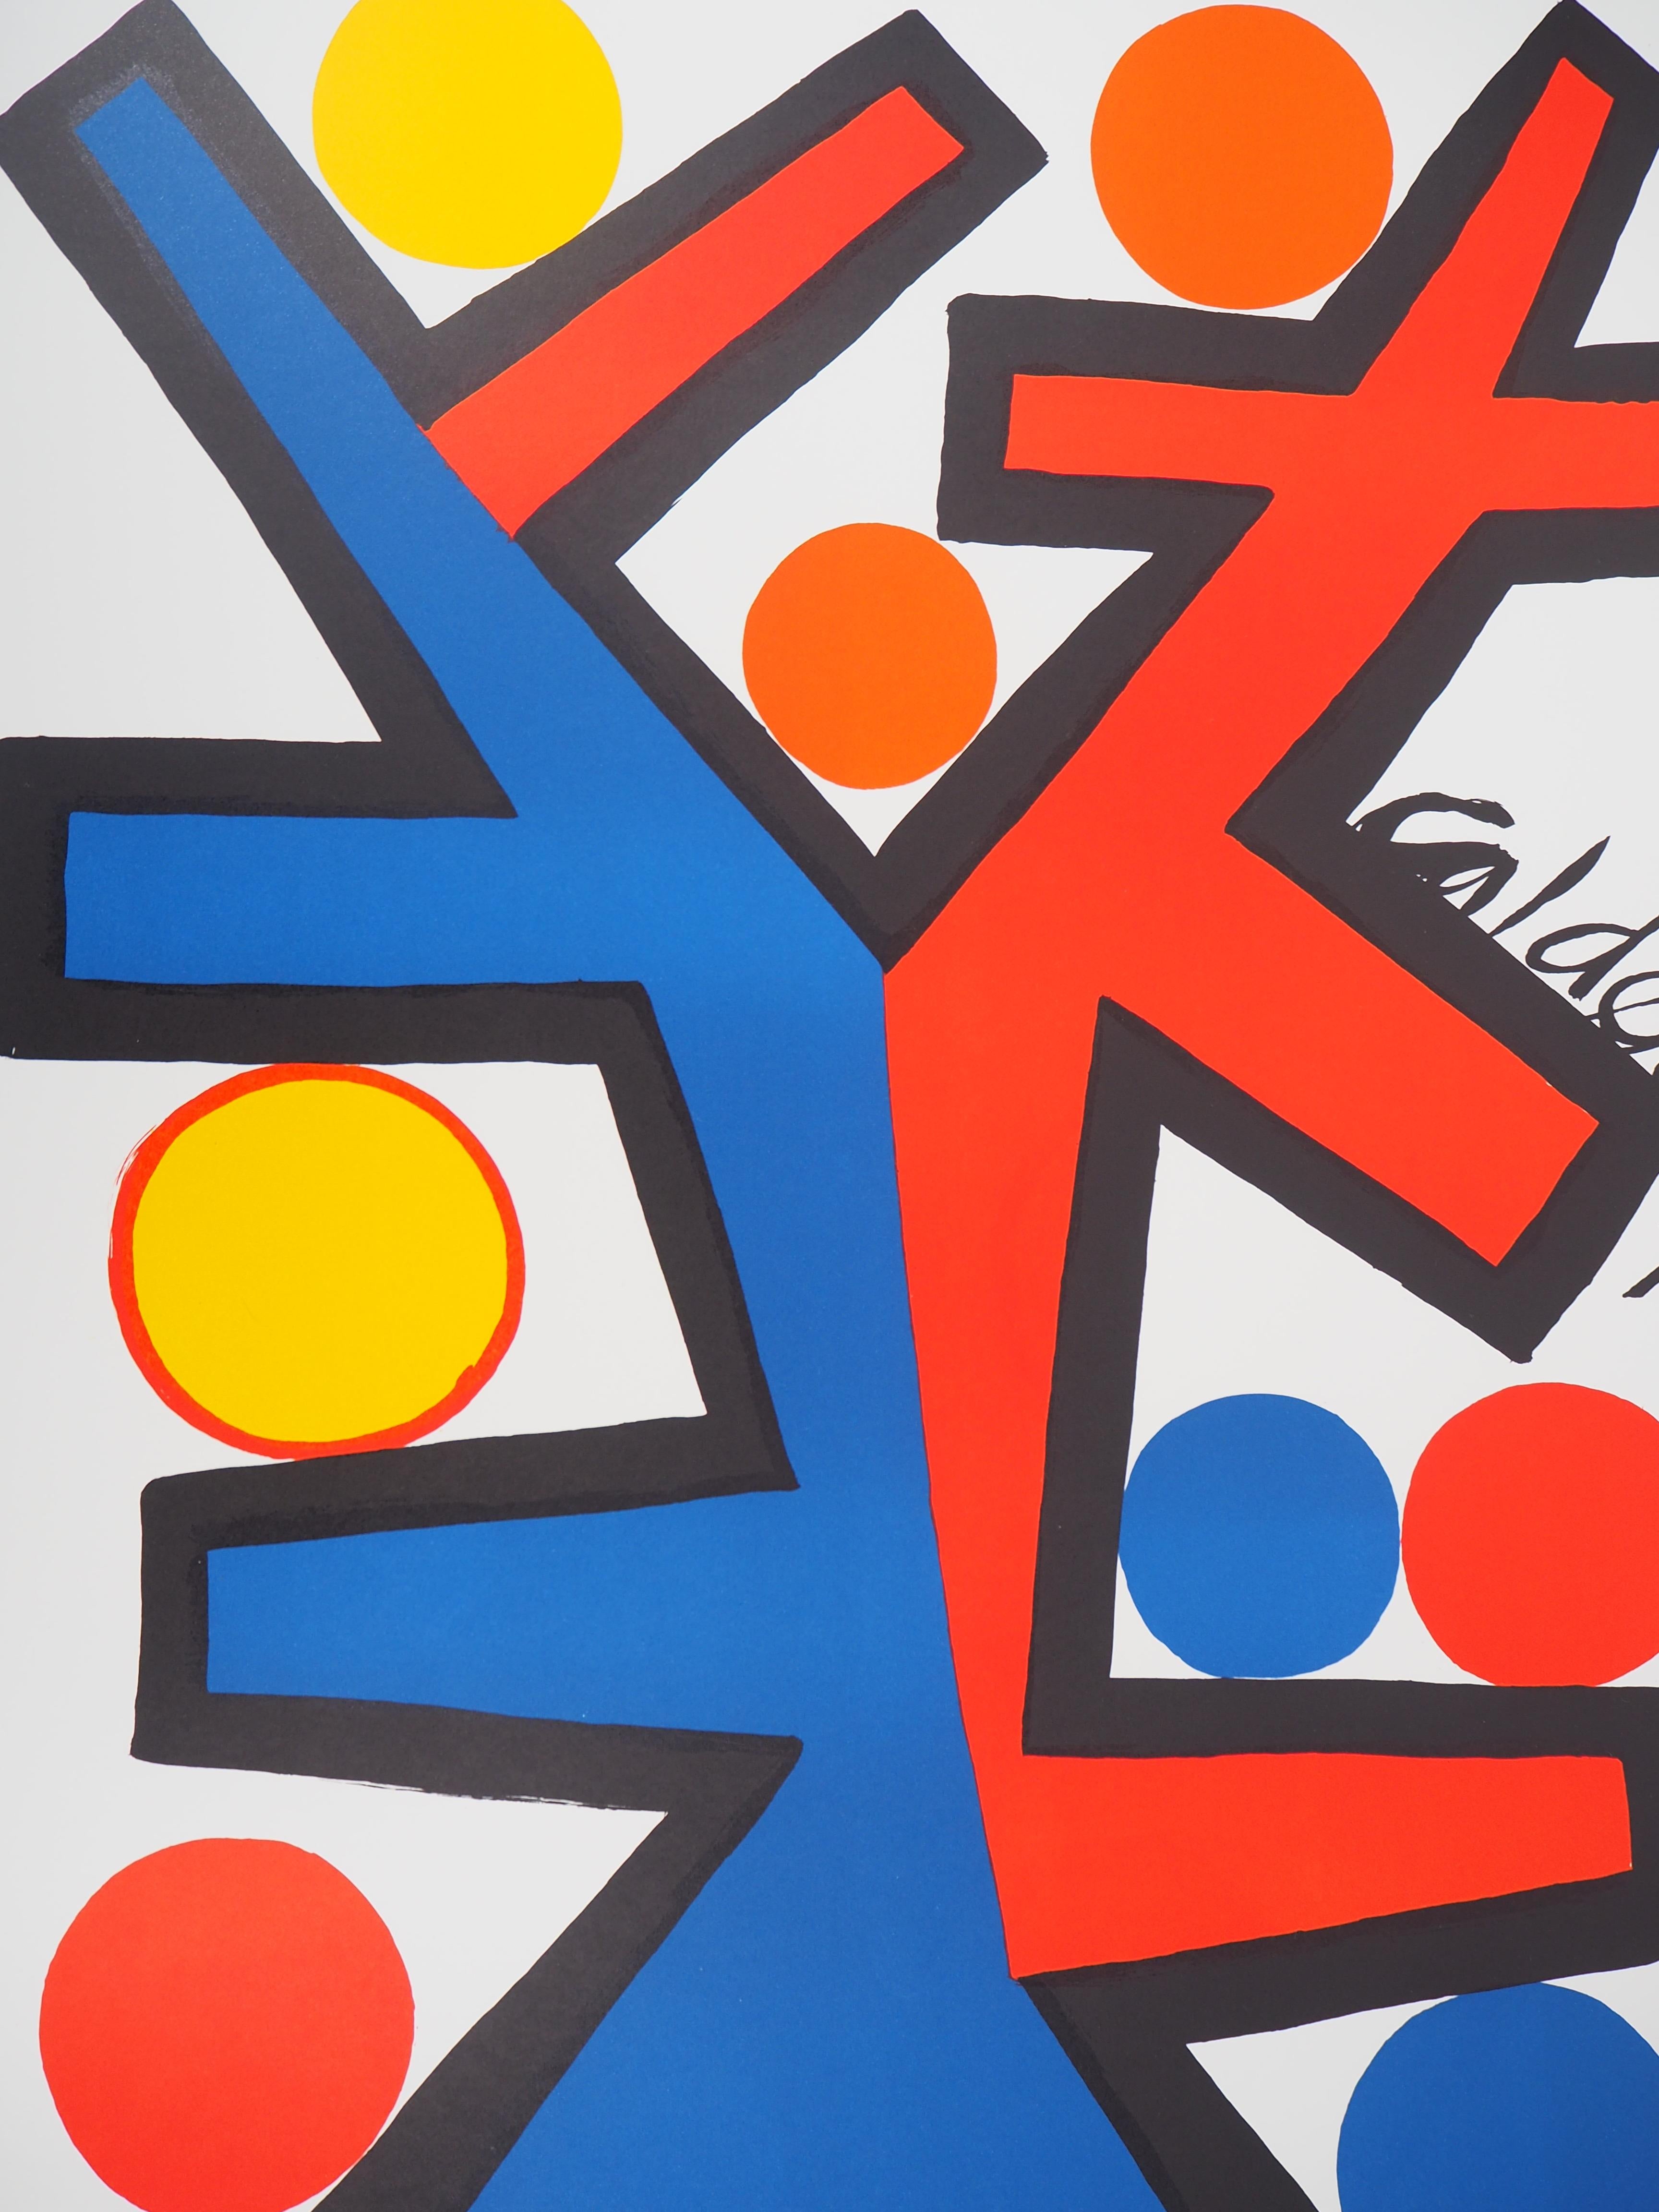 Abstract Composition (Assymetric) - Original Lithograph - Abstract Geometric Print by Alexander Calder